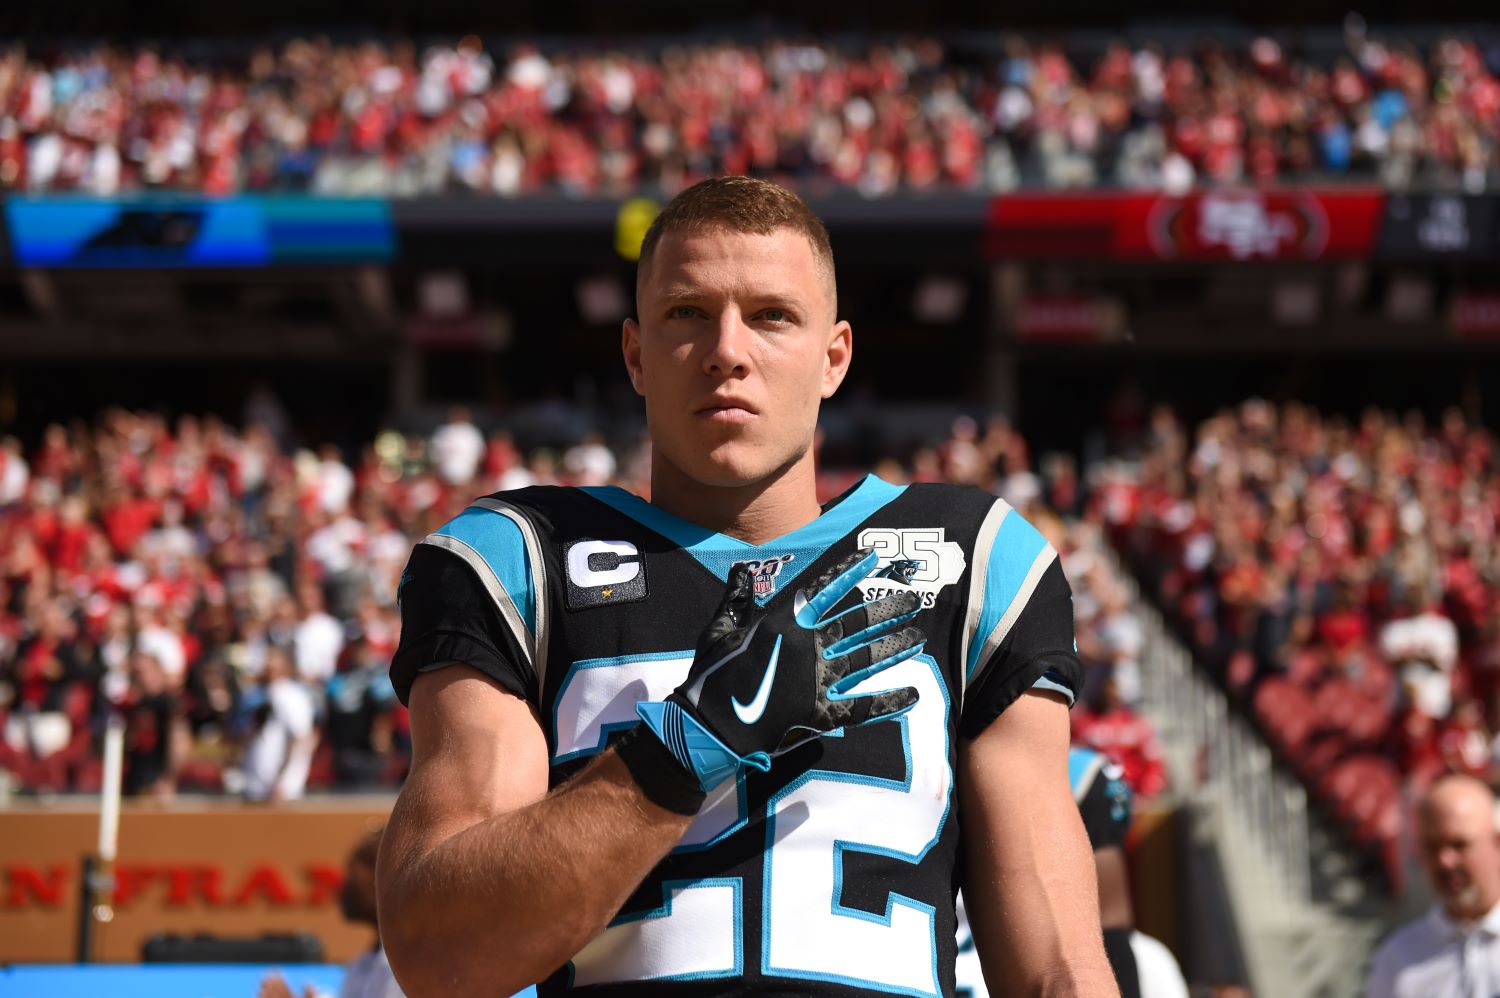 The Carolina Panthers need star RB Christian McCaffrey to play up to his $64 million contract in order to keep their playoff hopes alive.